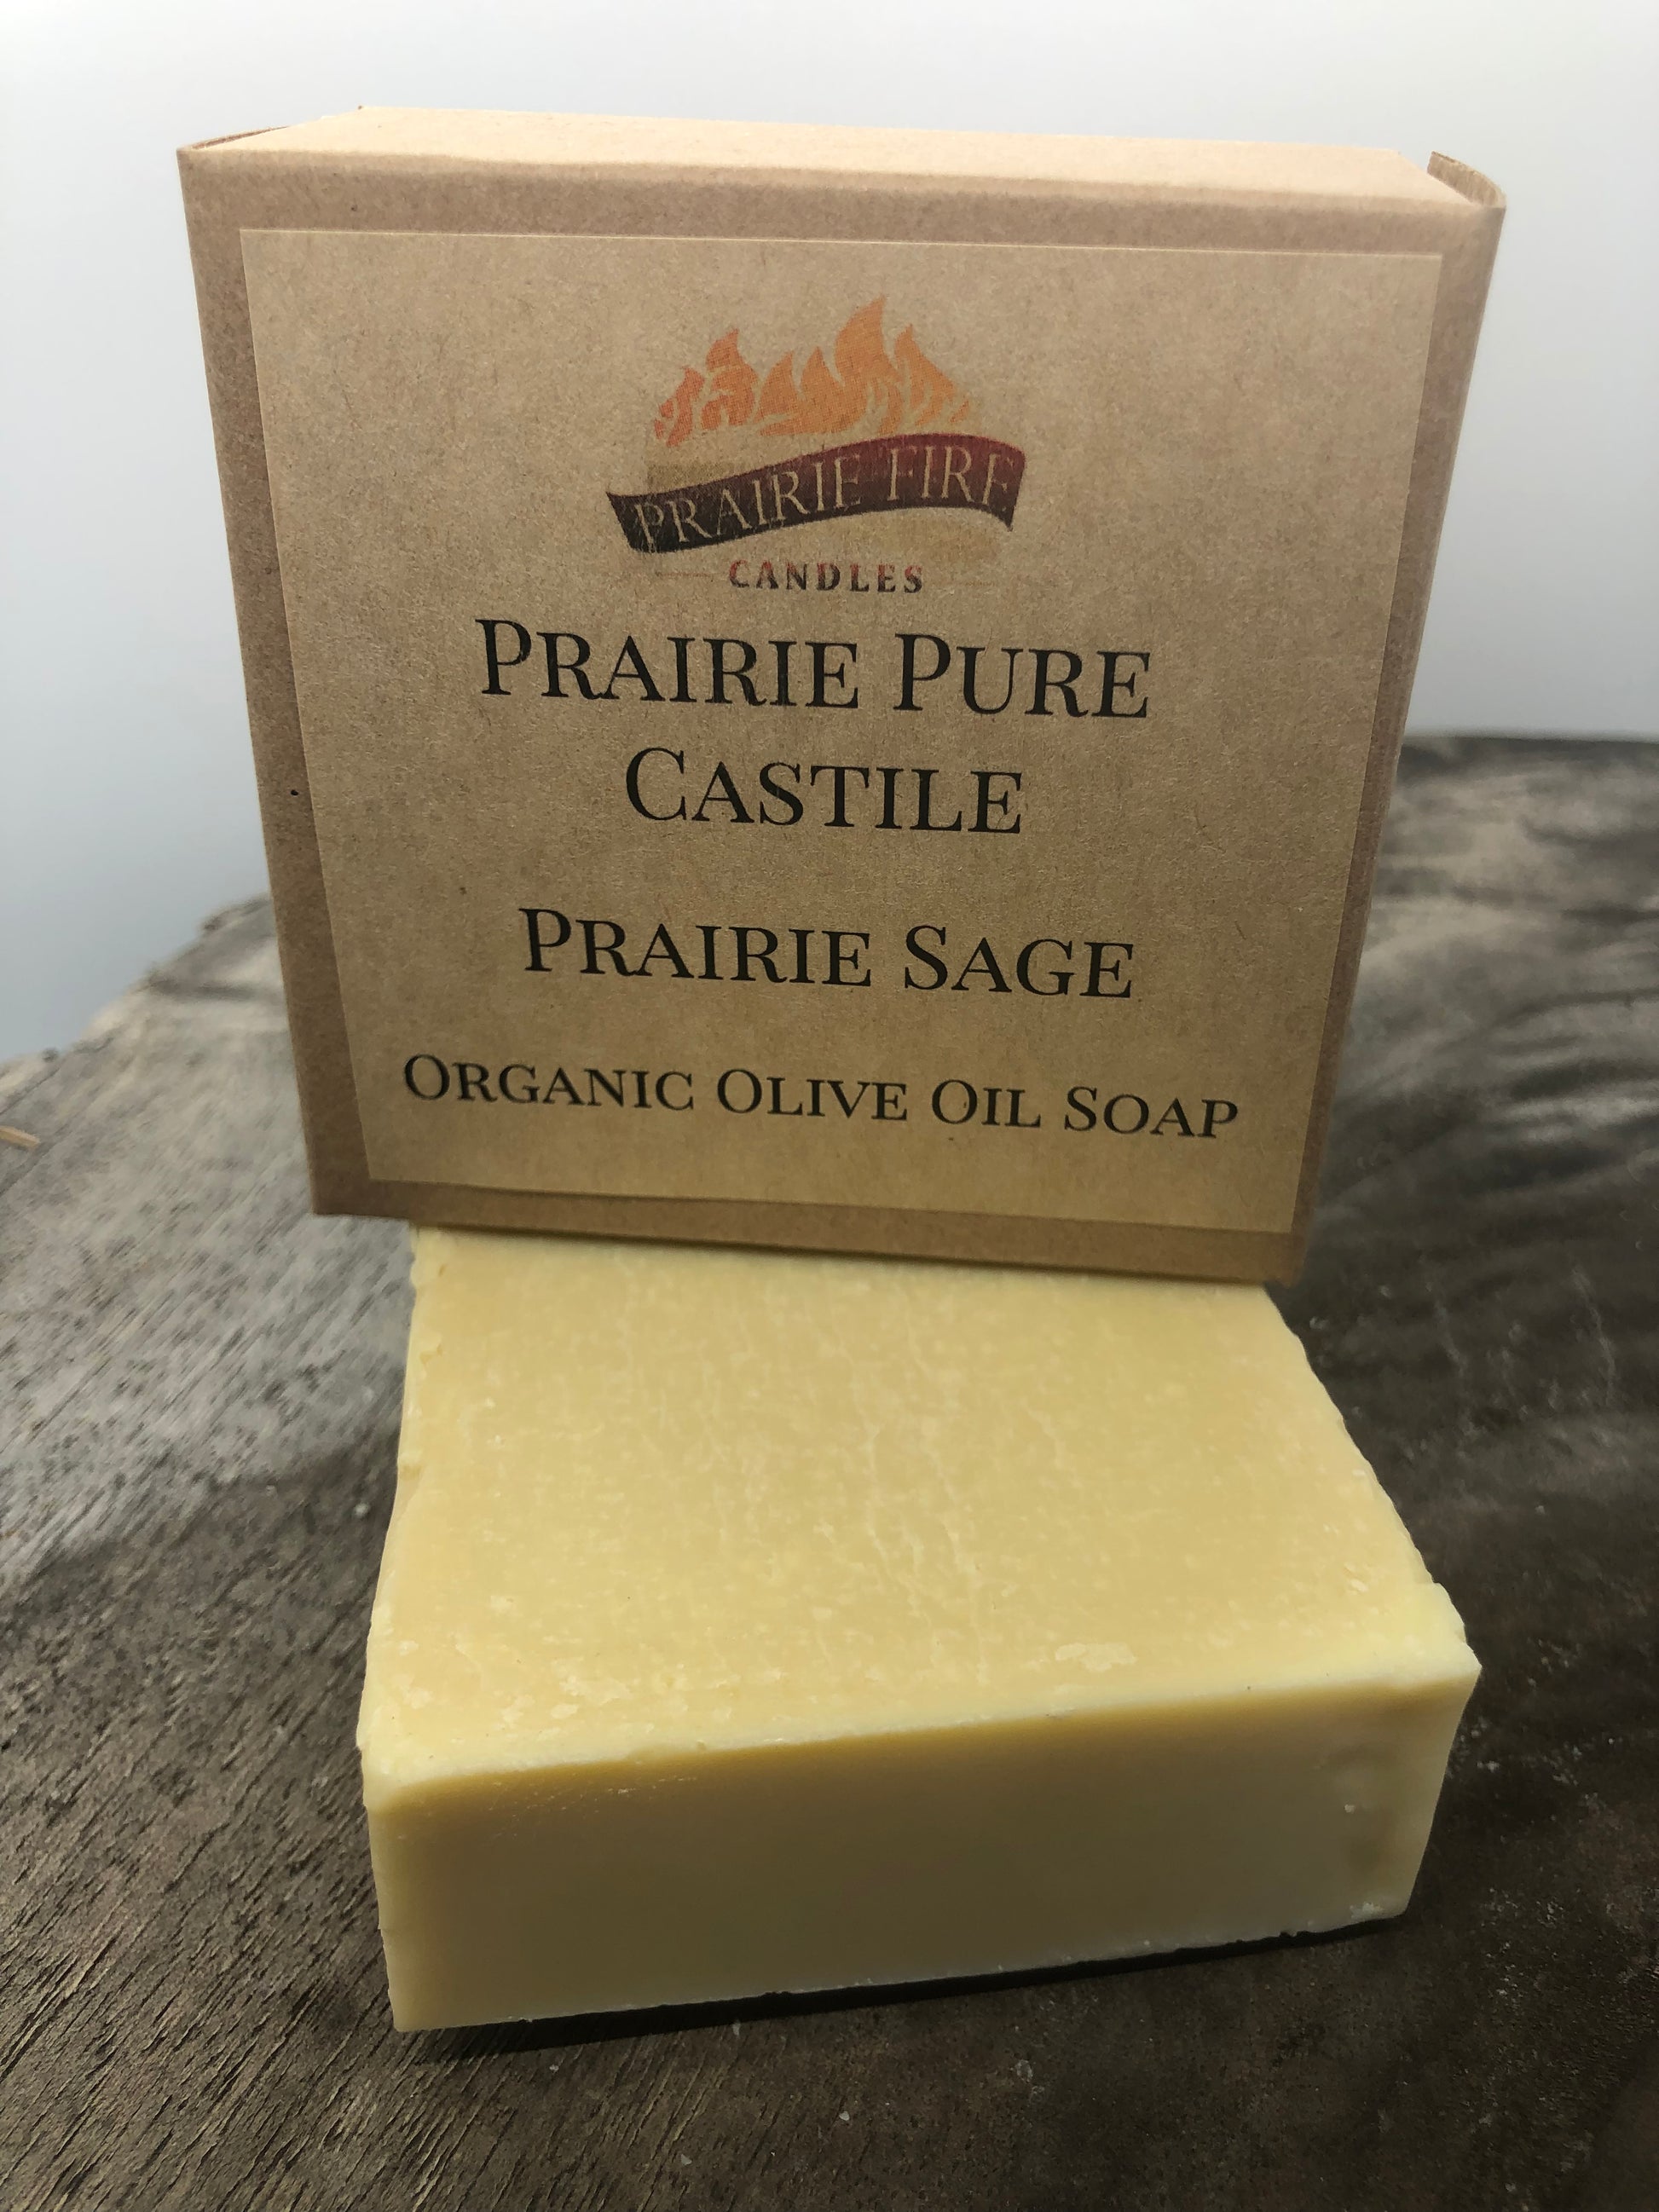 Prairie Sage Real Castile Organic Olive Oil Soap for Sensitive Skin - Dye Free - 100% Certified Organic Extra Virgin Olive Oil - Prairie Fire Candles